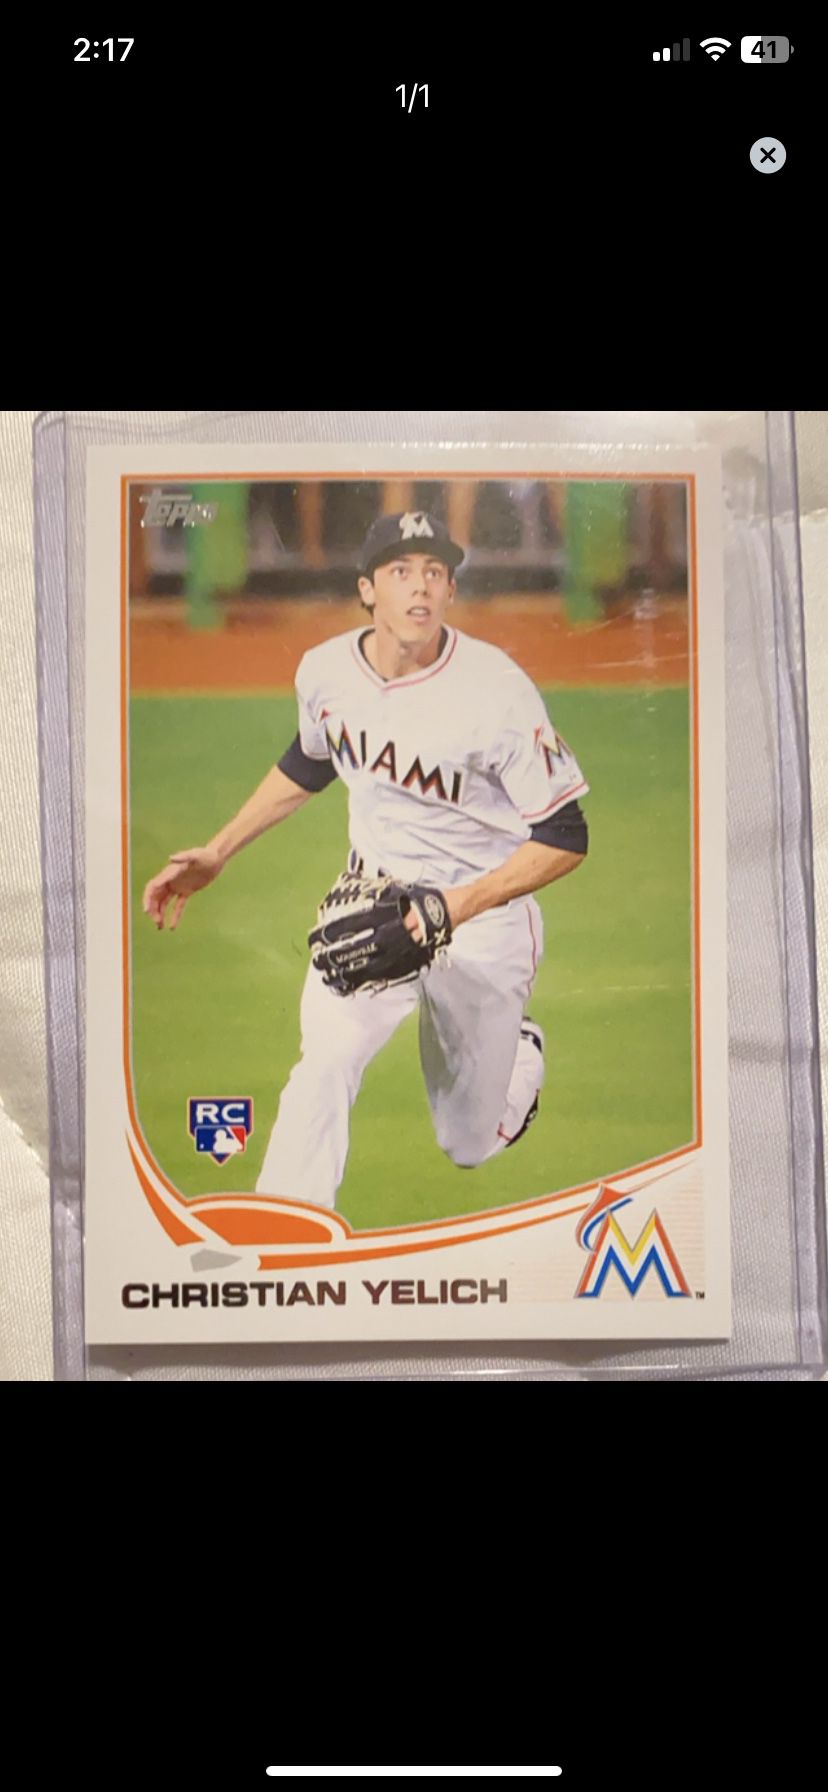 2013 Topps Update Christian Yelich Rookie